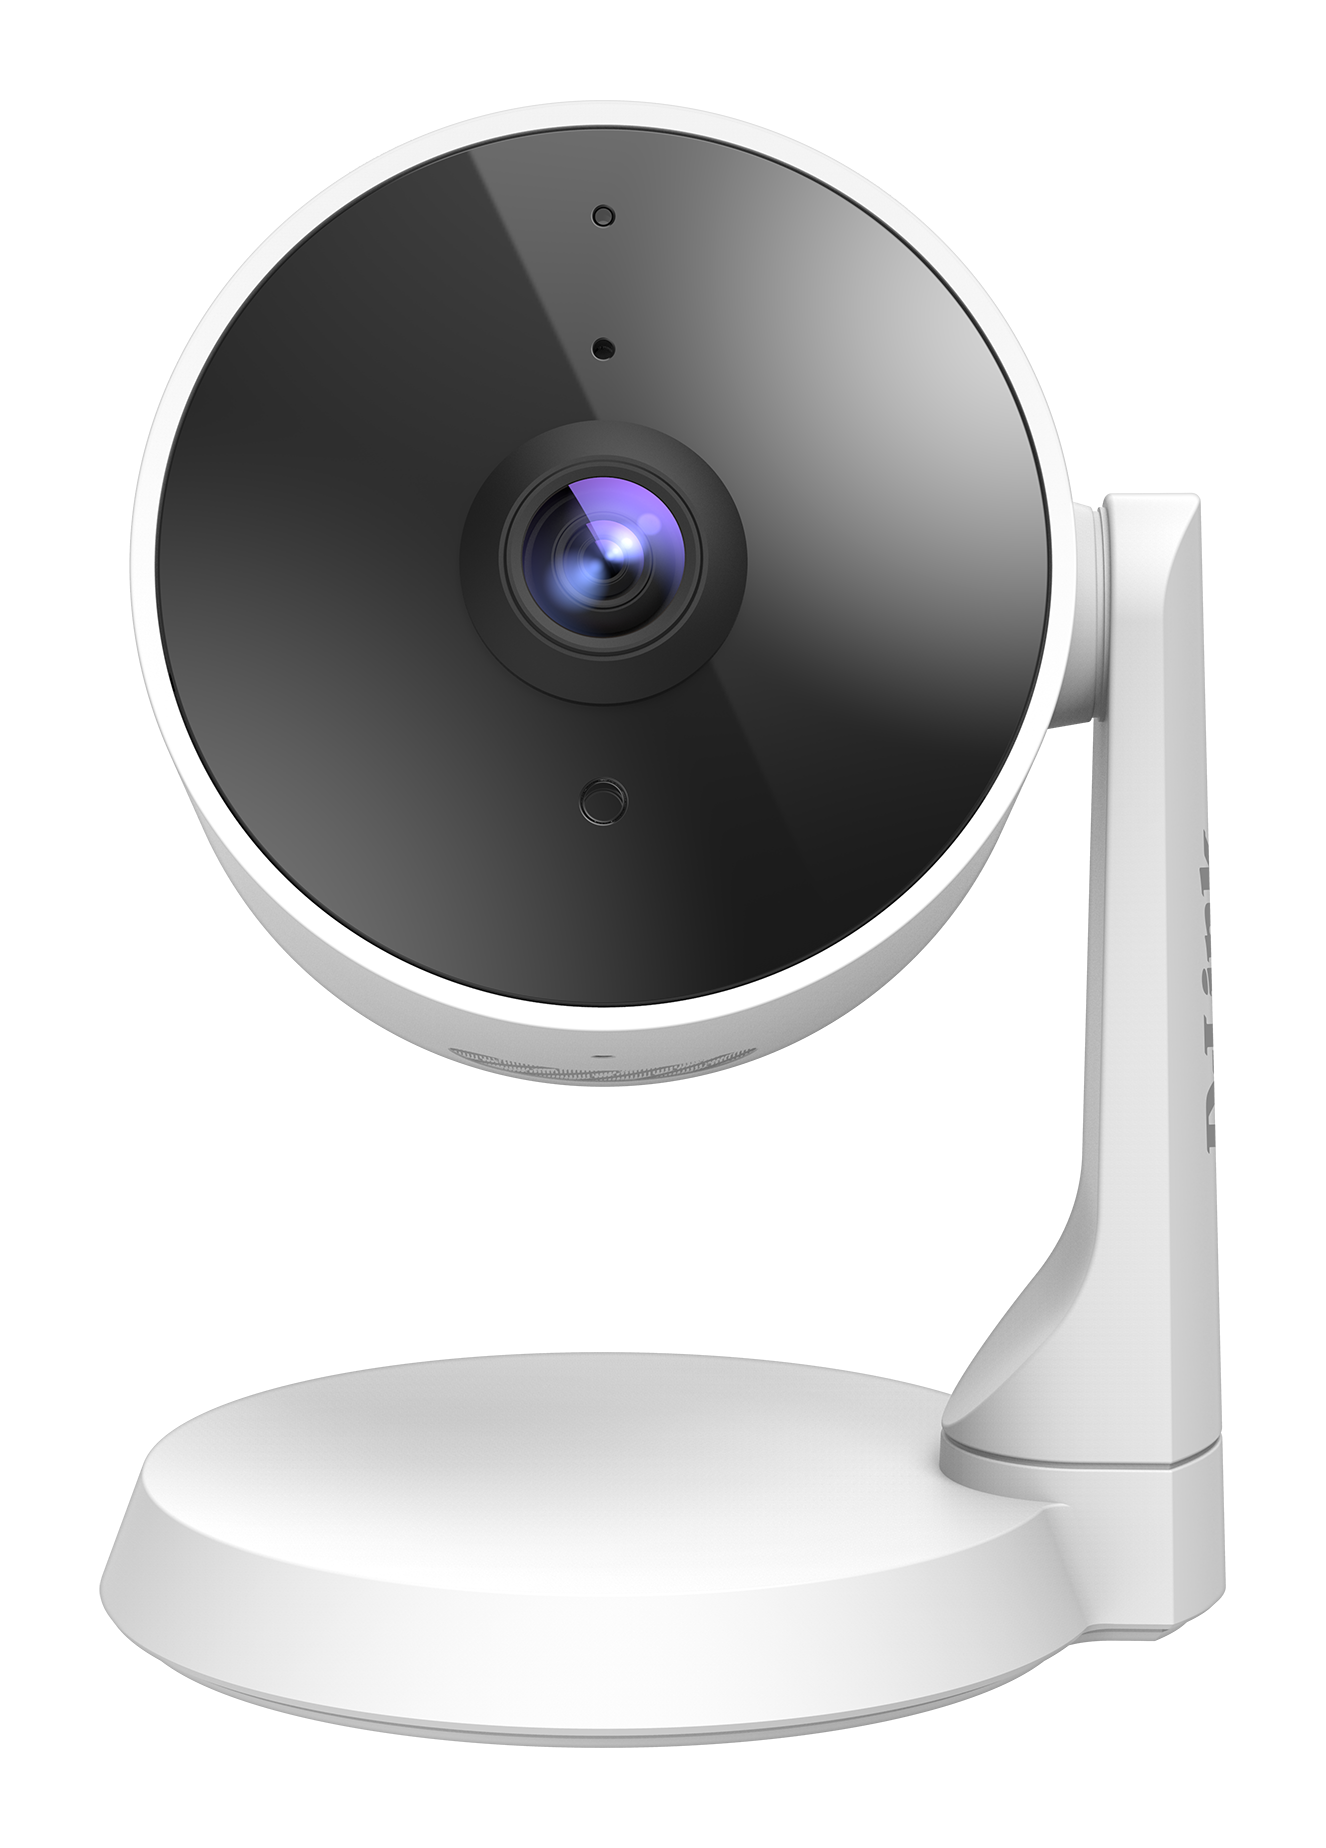 D-Link DCS-8325LH 1080p Camera with AI Motion Detection